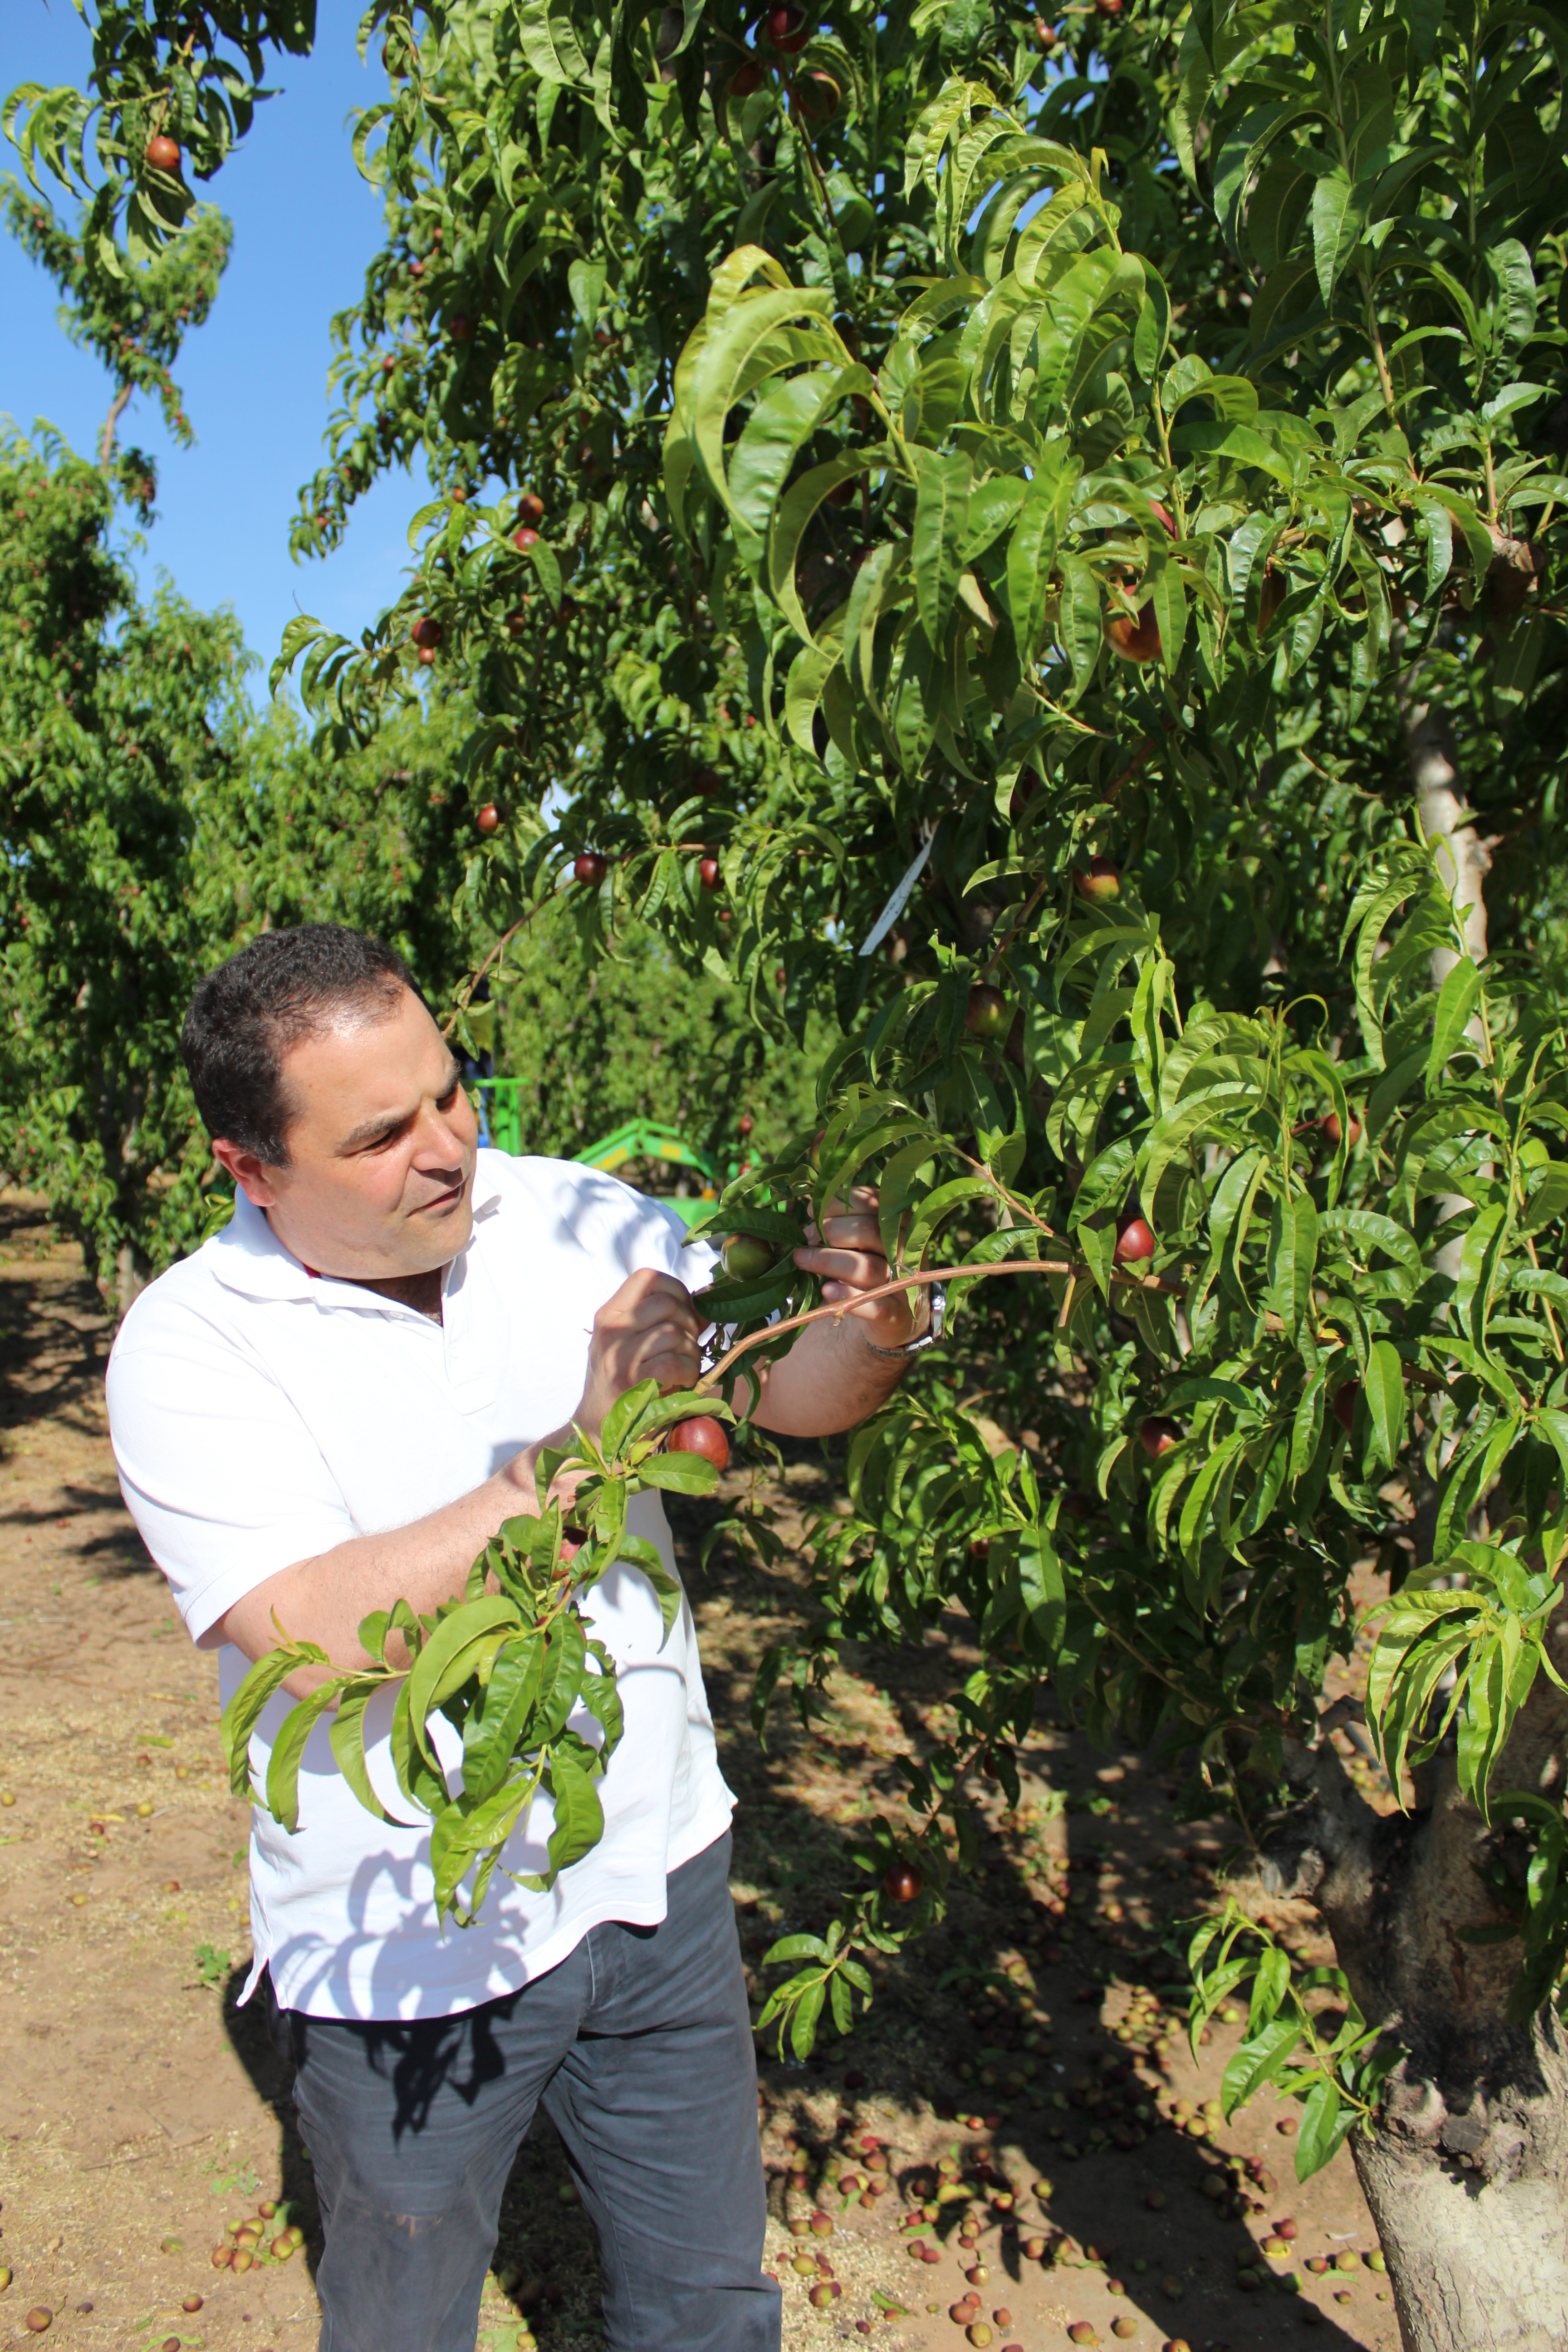 PASIN MEETS WITH FRUIT GROWERS